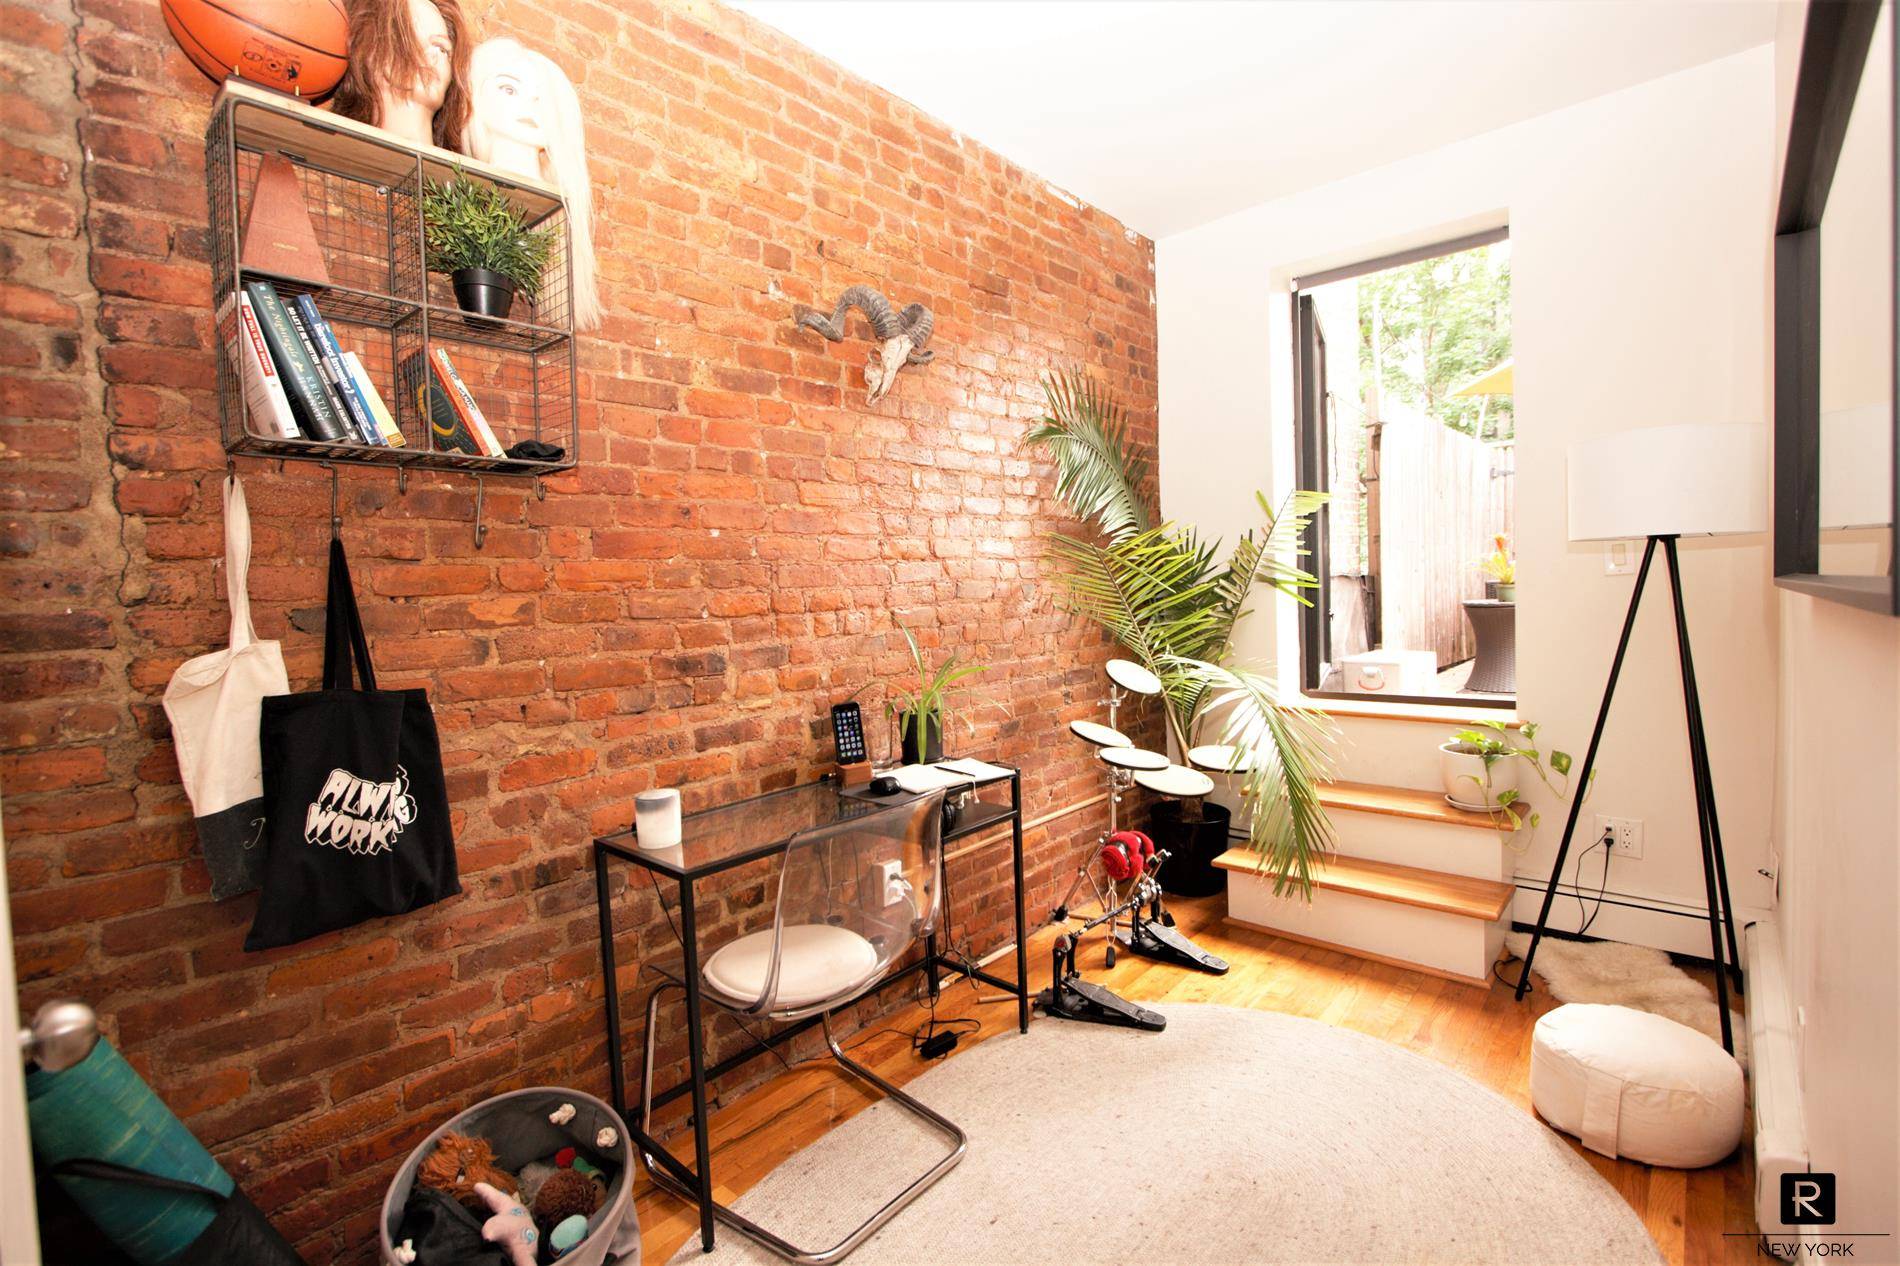 Available September 5th Pet Friendly Park Slope North 2 Bed Brownstone Floor Through Layout Large Private Outdoor Space via 18' x 20' Setback Terrace, Literally Steps from the 2 3 ...